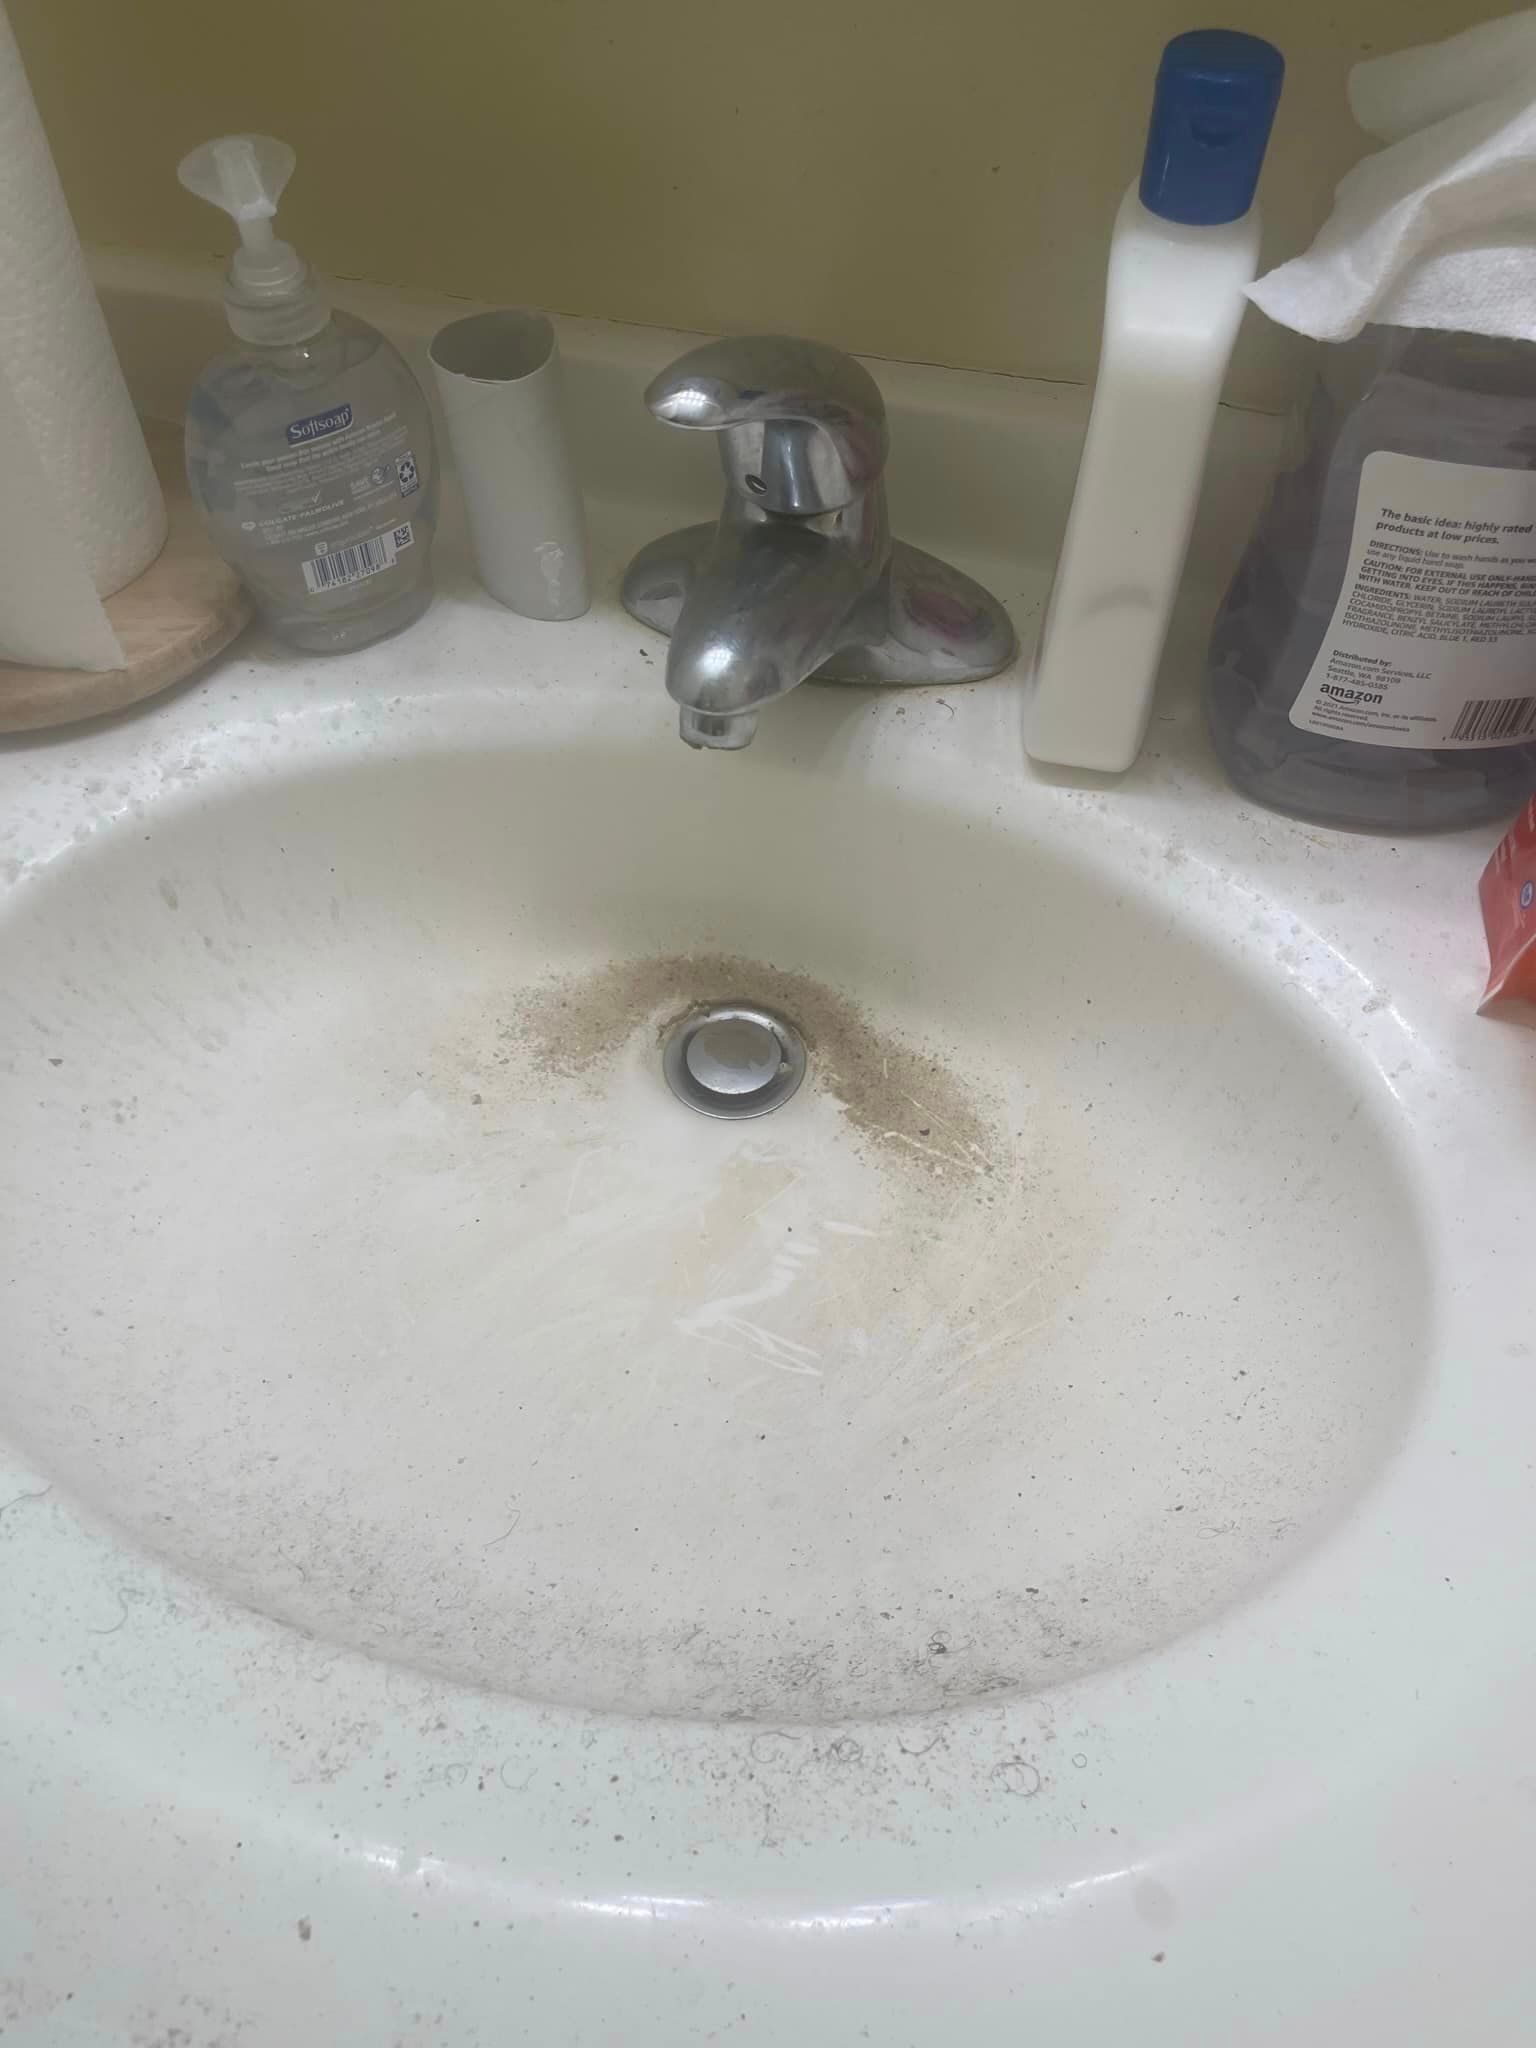 Before is a dirty bathroom sink with a faucet and soap bottles on the counter 